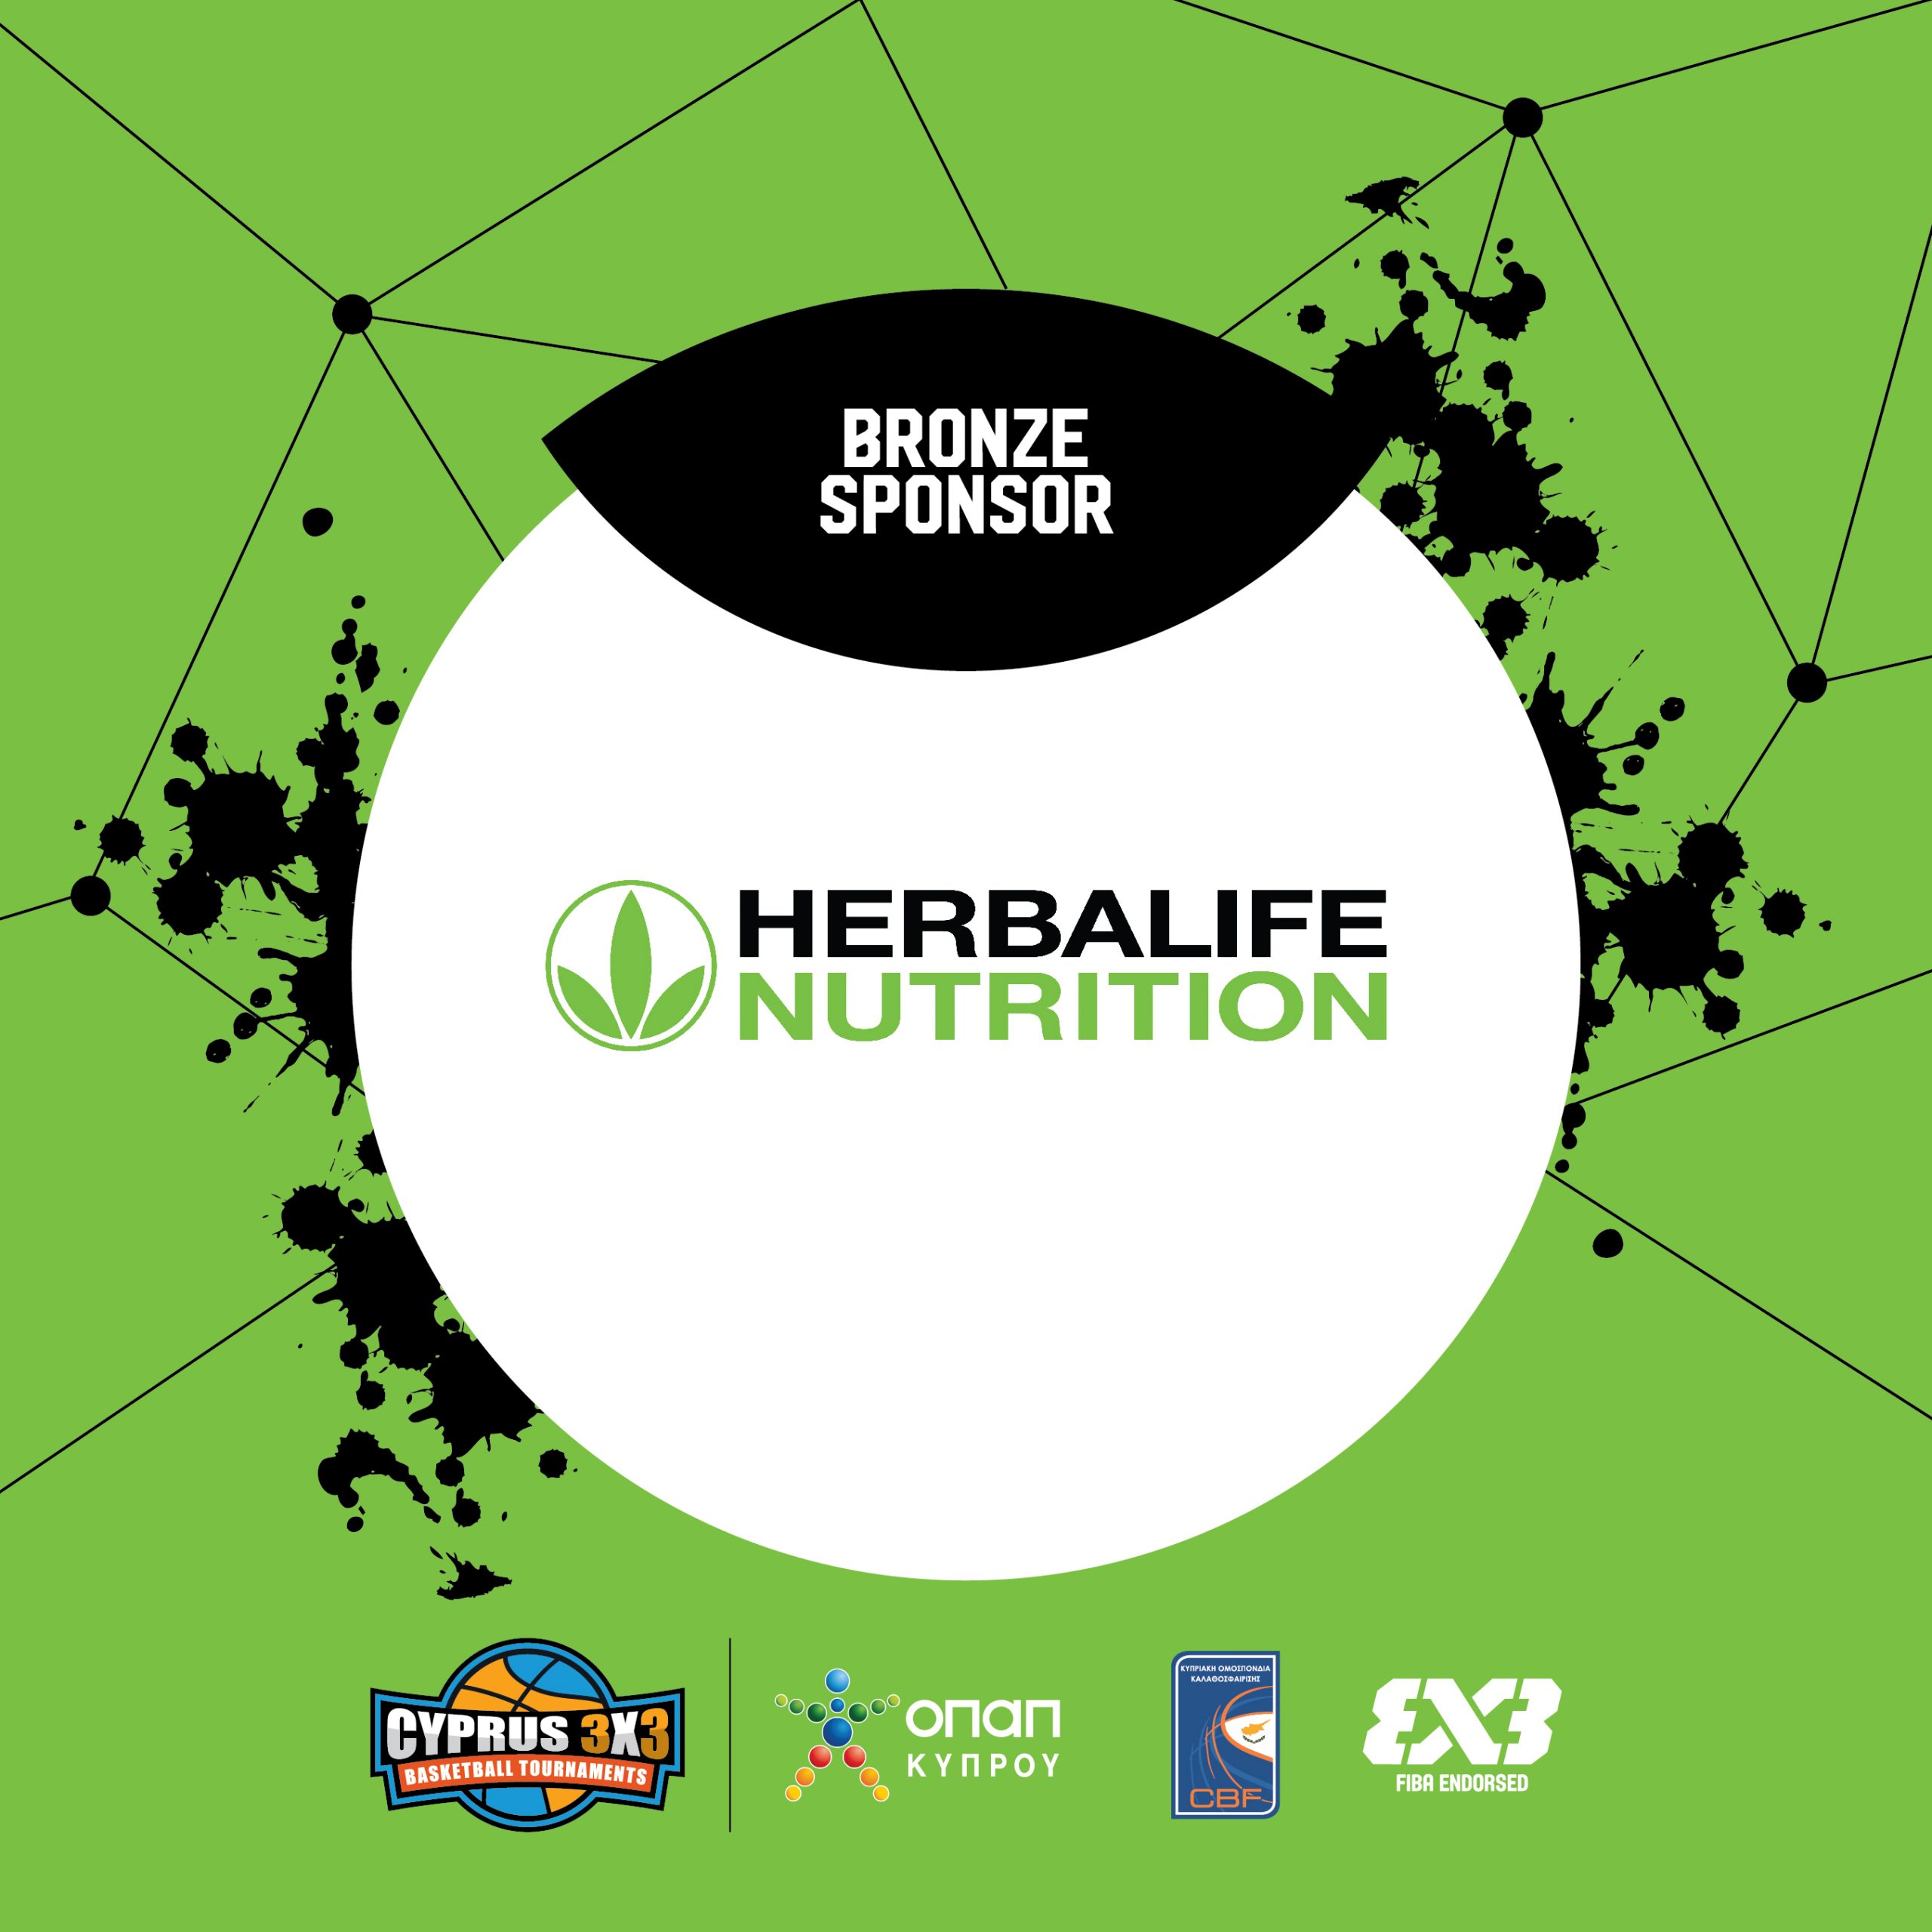 You are currently viewing Η Herbalife Nutrition Χάλκινος Χορηγός του OPAP Cyprus 3X3 2022